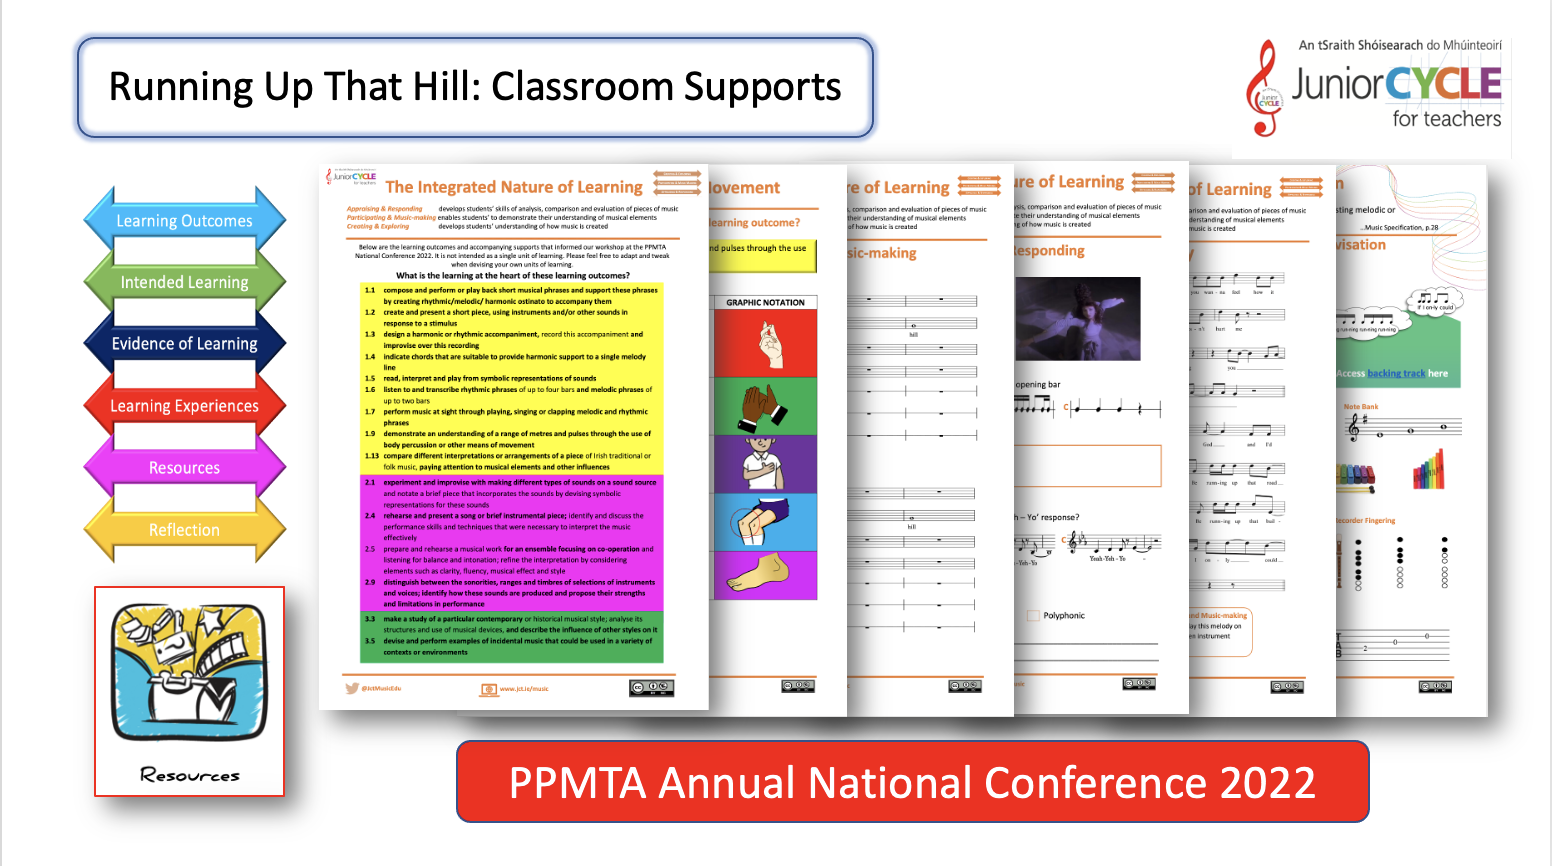 Link to Running Up That Hill Classroom Supports